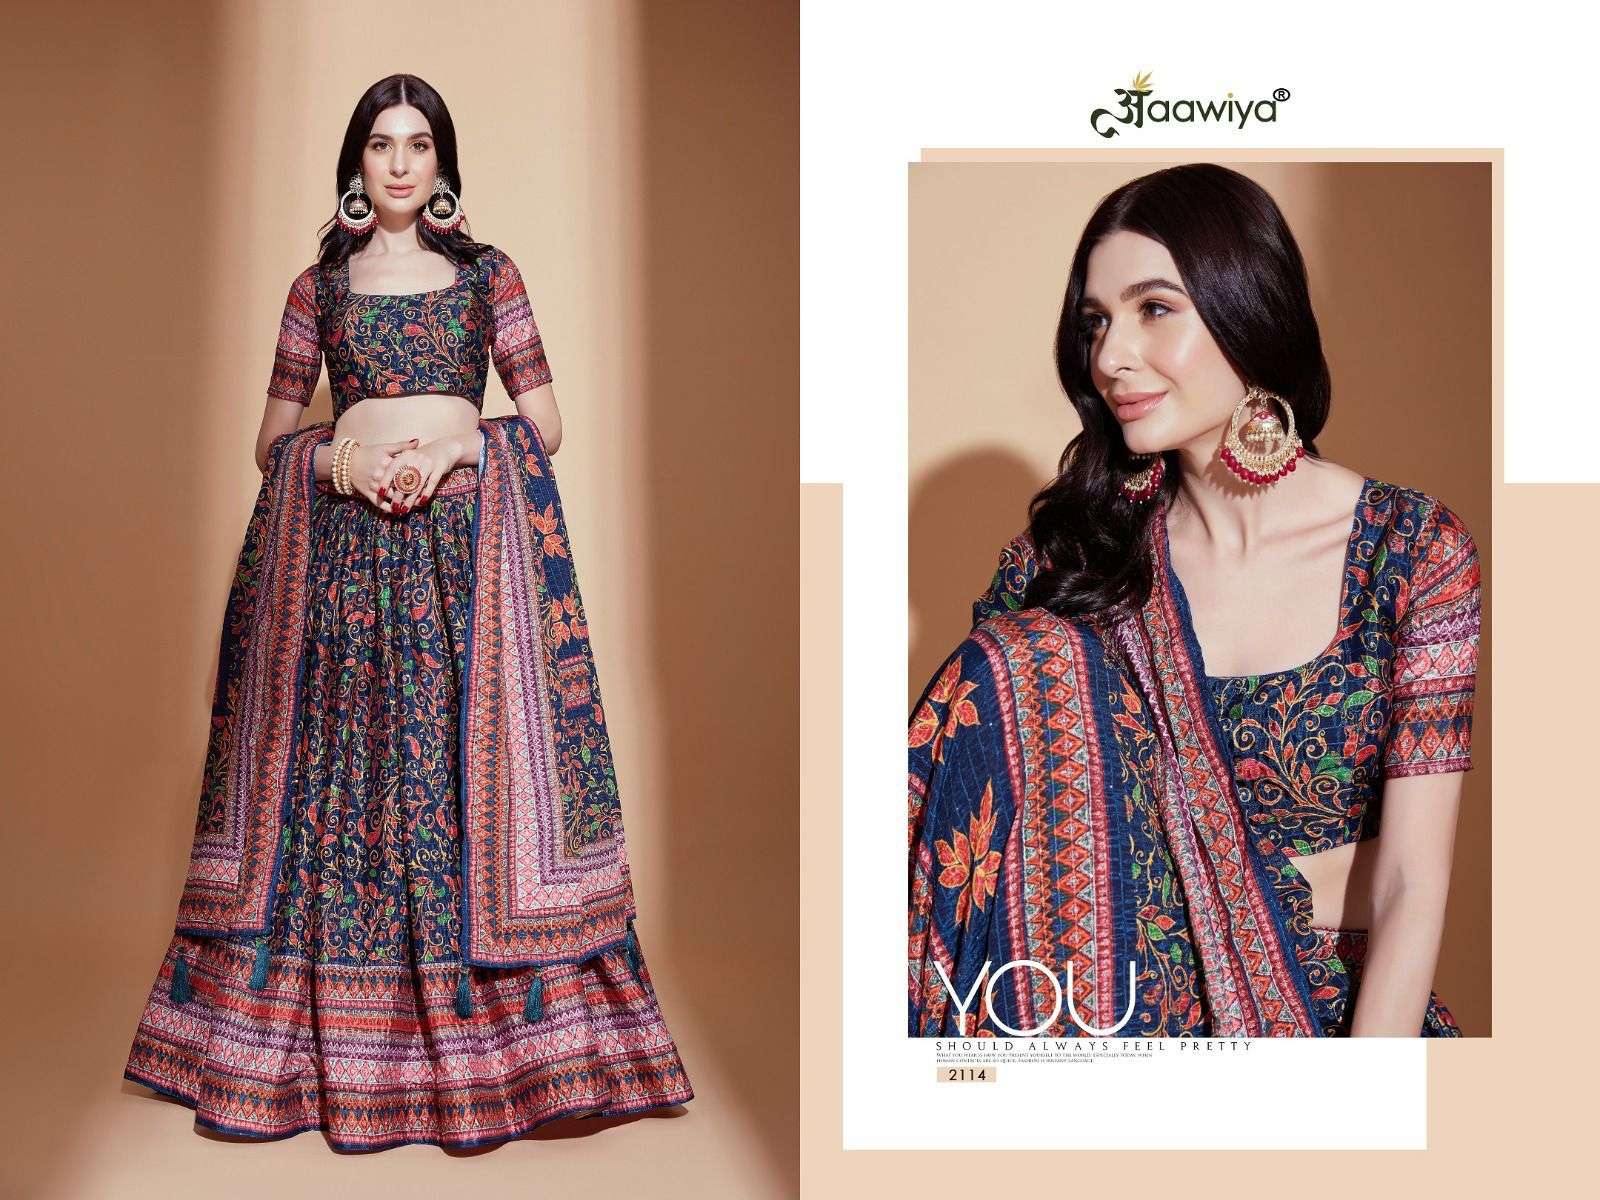 Aleena Vol-1 By Aawiya 2111 To 2115 Series Designer Beautiful Navratri Collection Occasional Wear & Party Wear Chinnon Lehengas At Wholesale Price